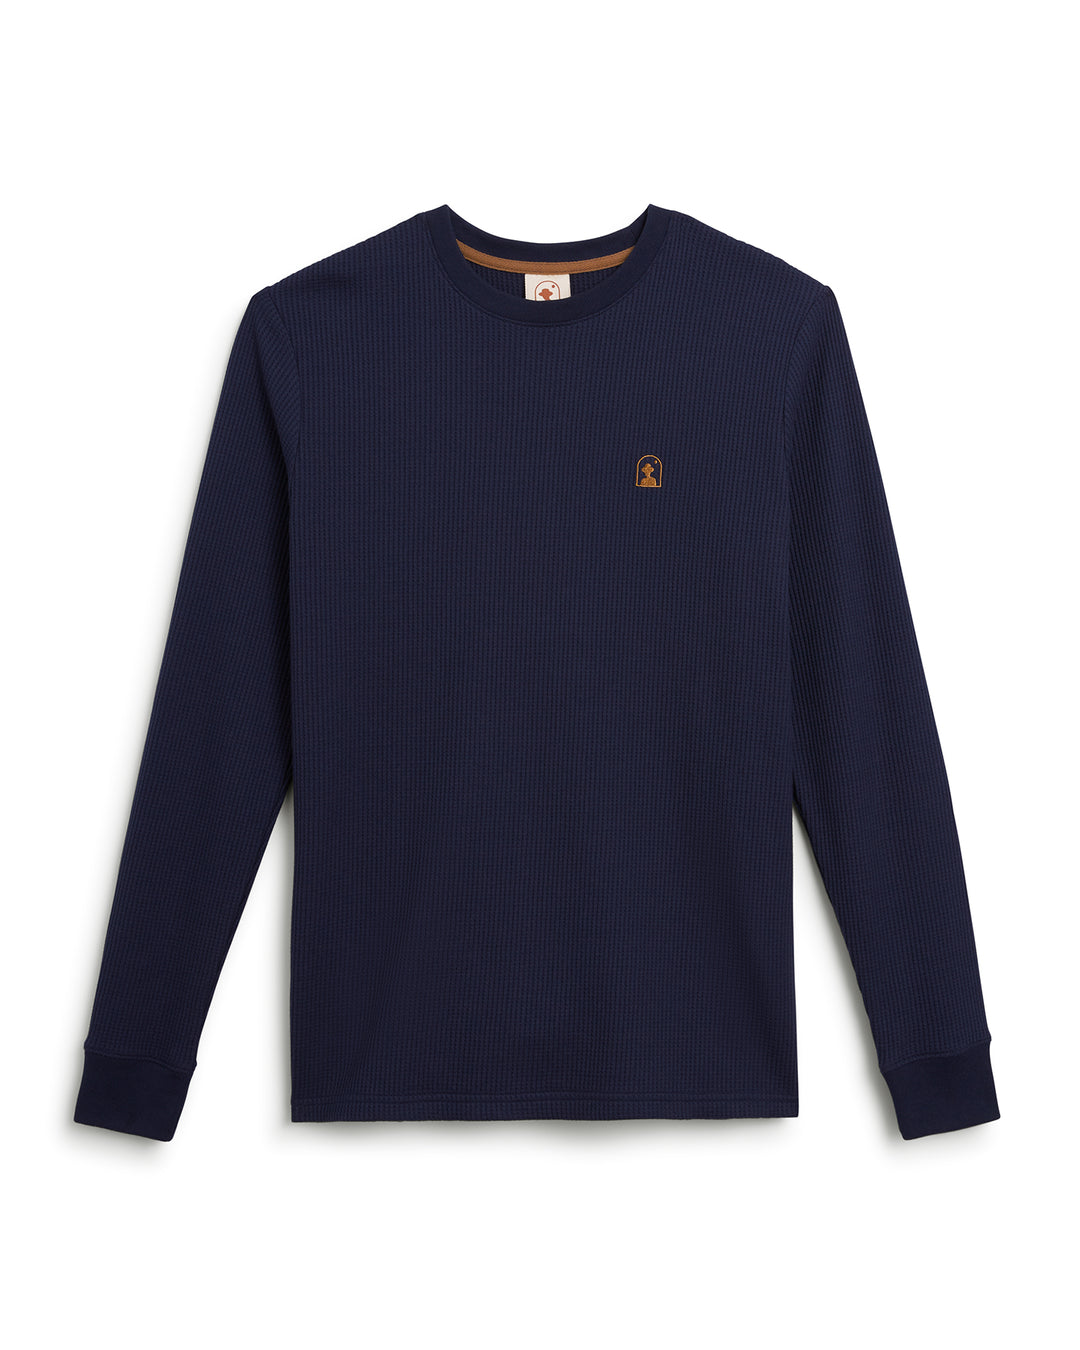 A Dandy Del Mar Cannes Long Sleeve Tee - Luxe Navy with an orange logo.